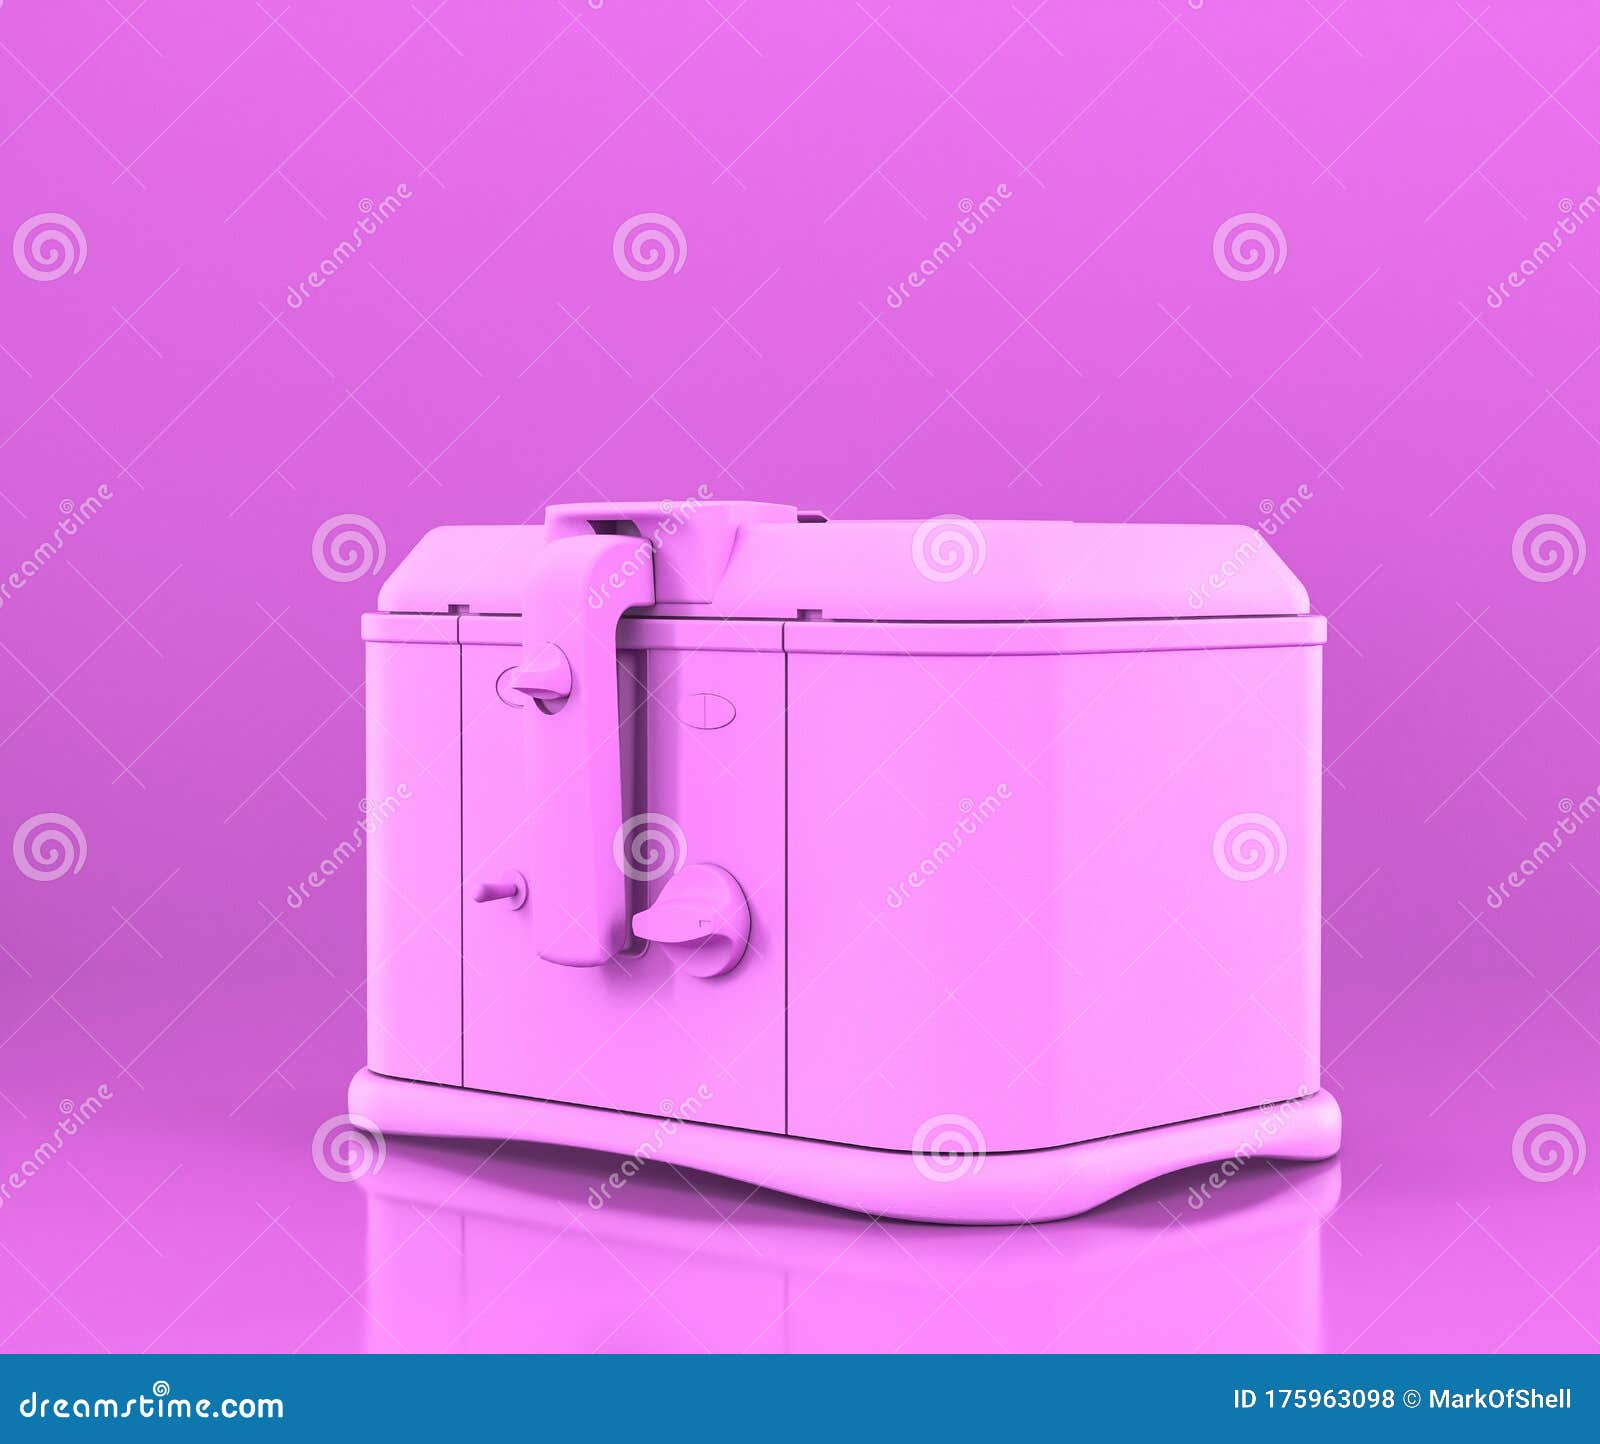 https://thumbs.dreamstime.com/z/deep-fryer-small-kitchen-appliances-flat-pink-color-single-monochrome-colors-d-rendering-isolated-shot-175963098.jpg